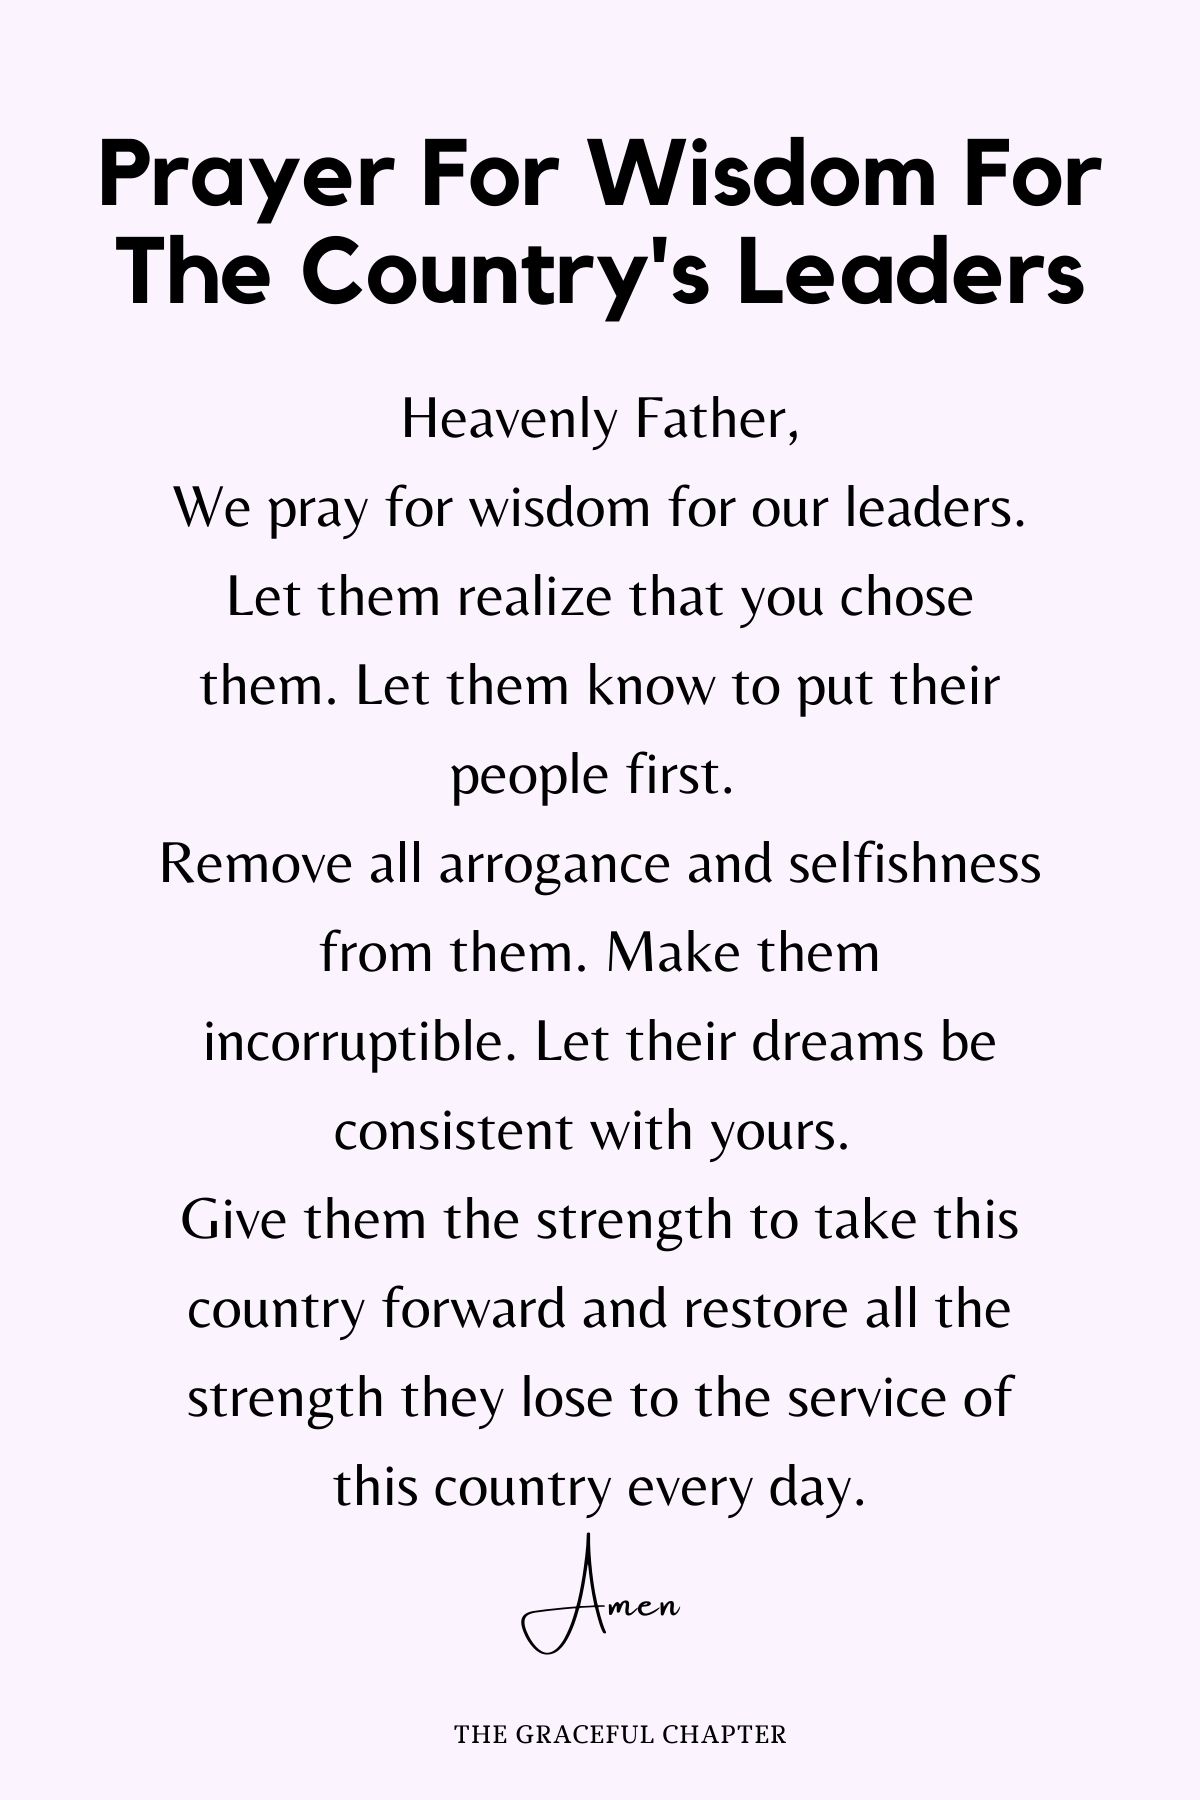 Prayer for wisdom for the country's leaders